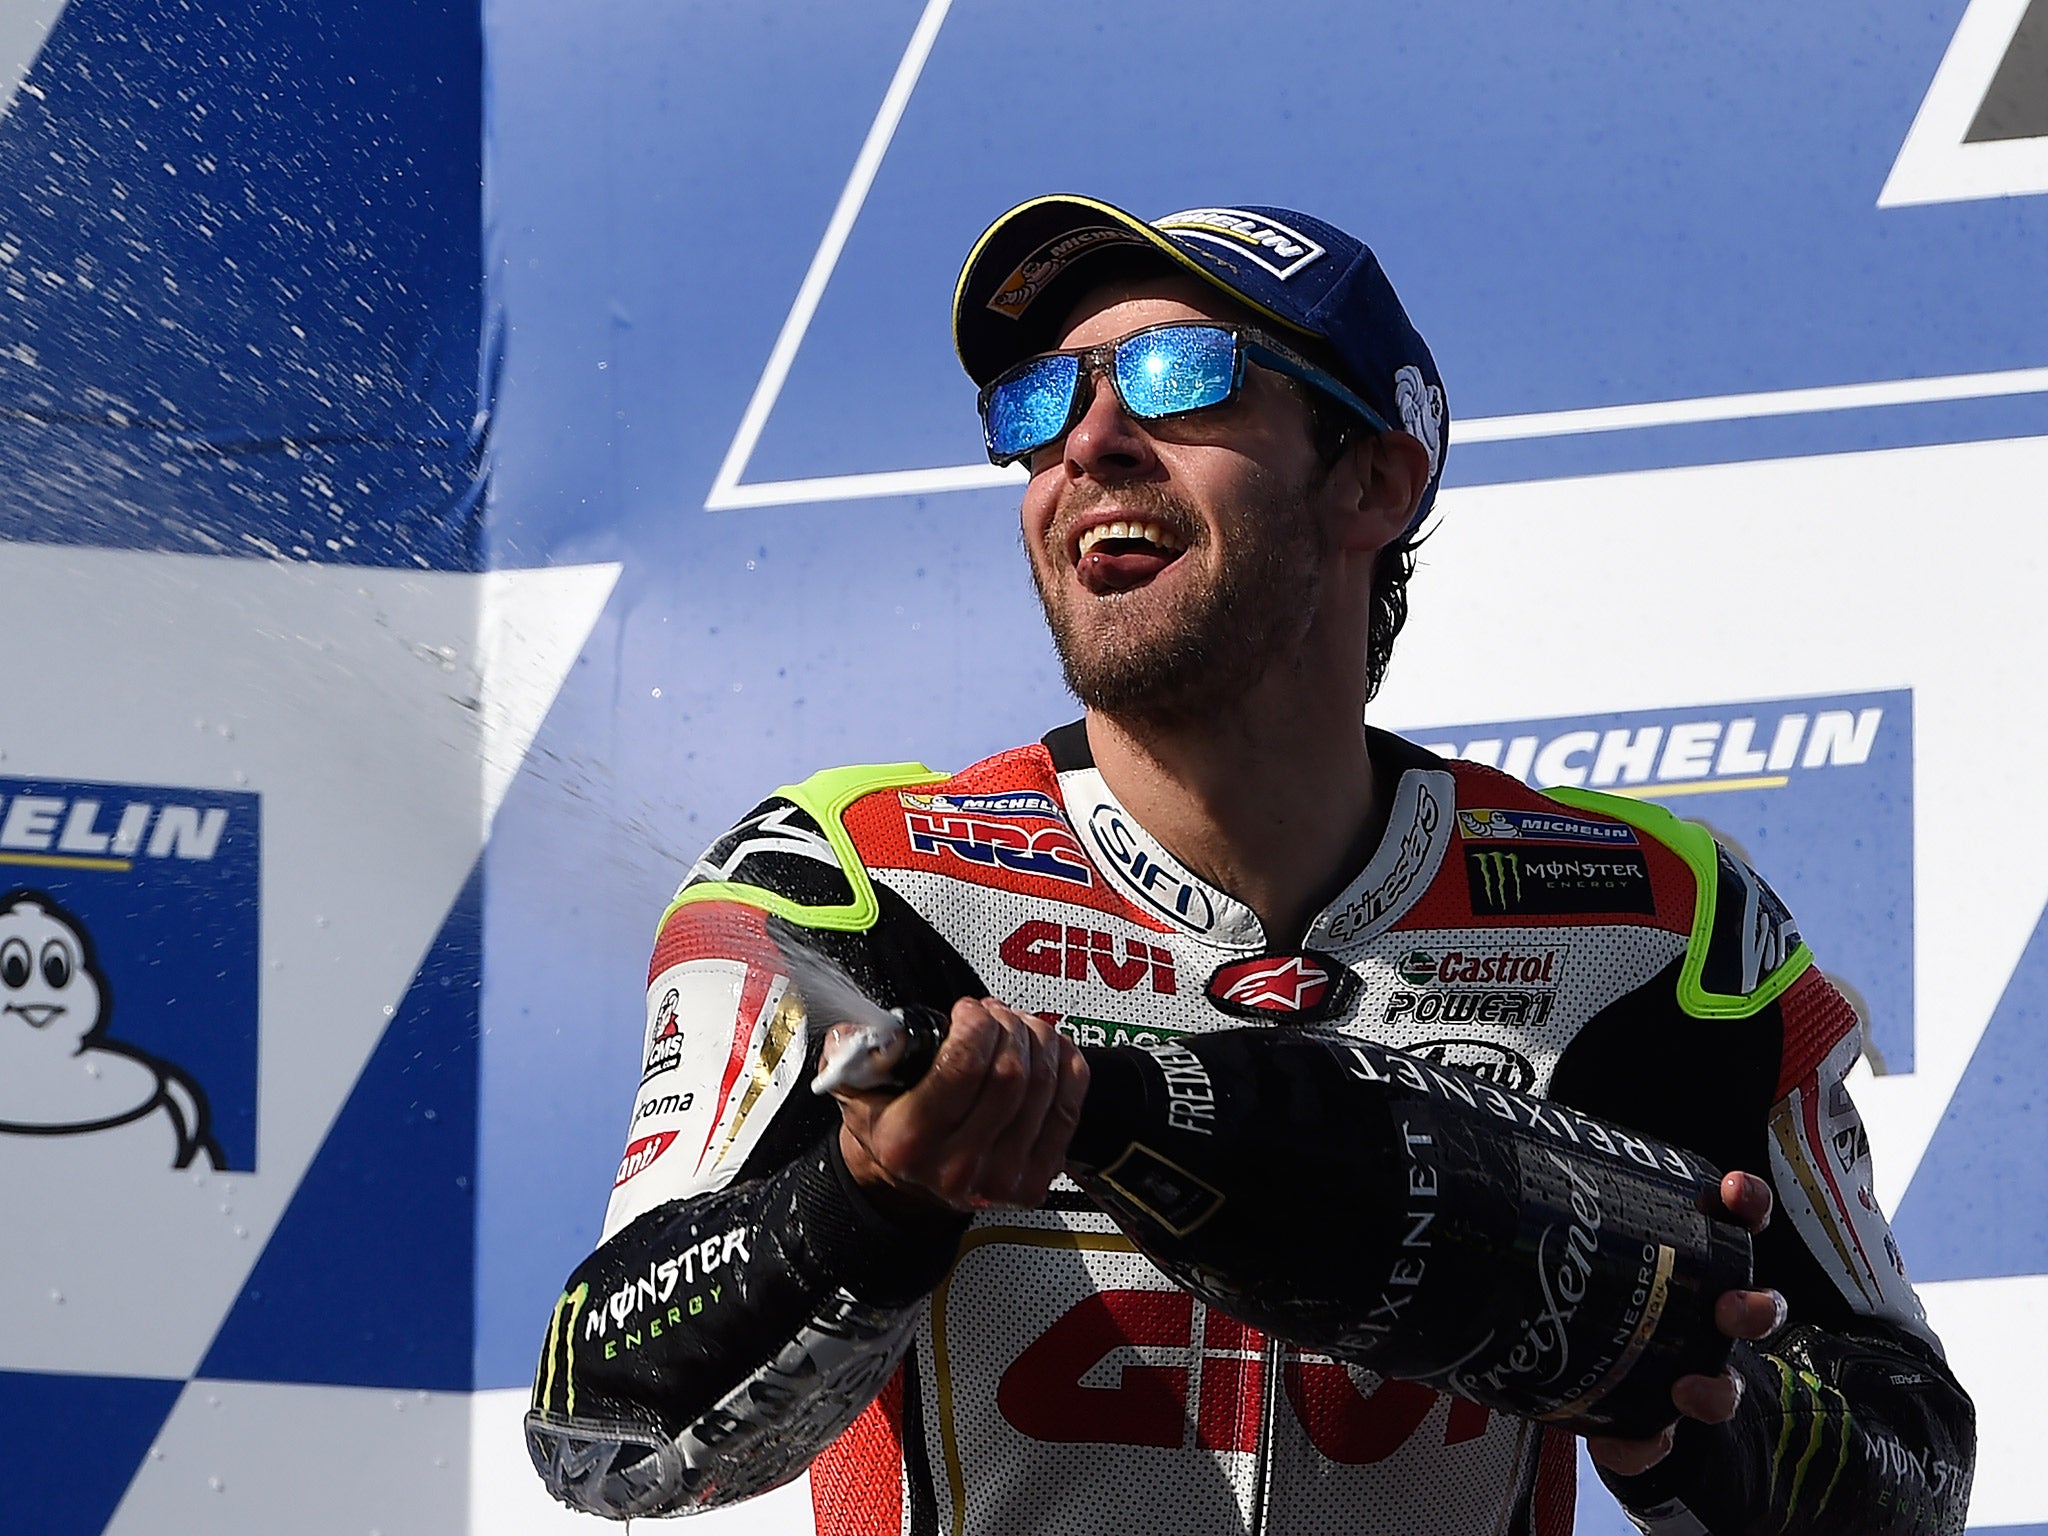 Crutchlow adds his victory at Phillip Island to his success at Brno earlier this year